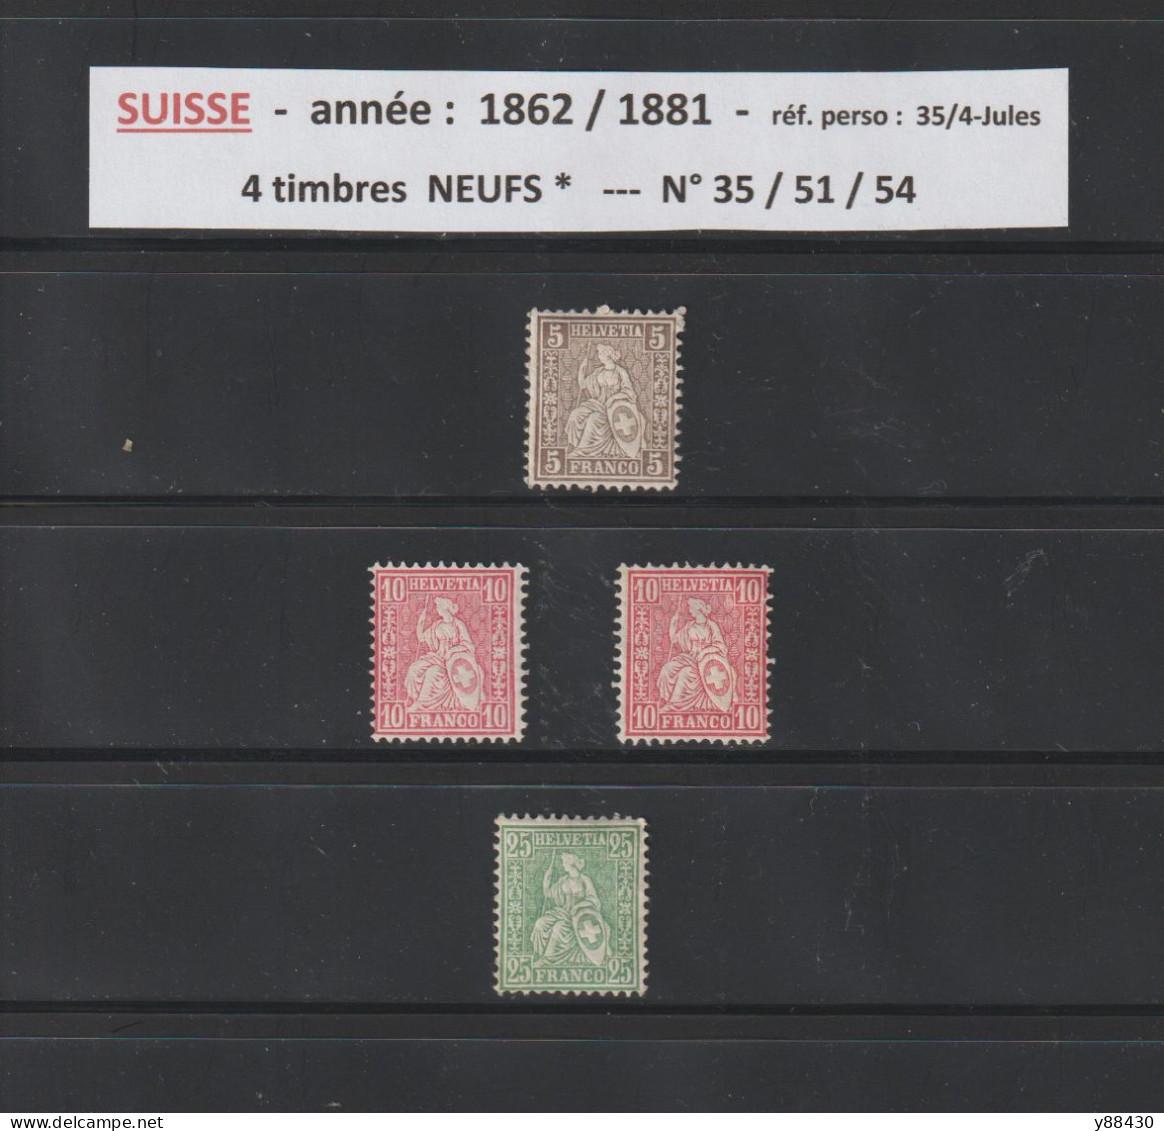 SUISSE - 4 Timbres Neufs * - N° 35 / 51 / 54 De 1862/1881 -  Helvetia Assise - 2 Scan - Neufs